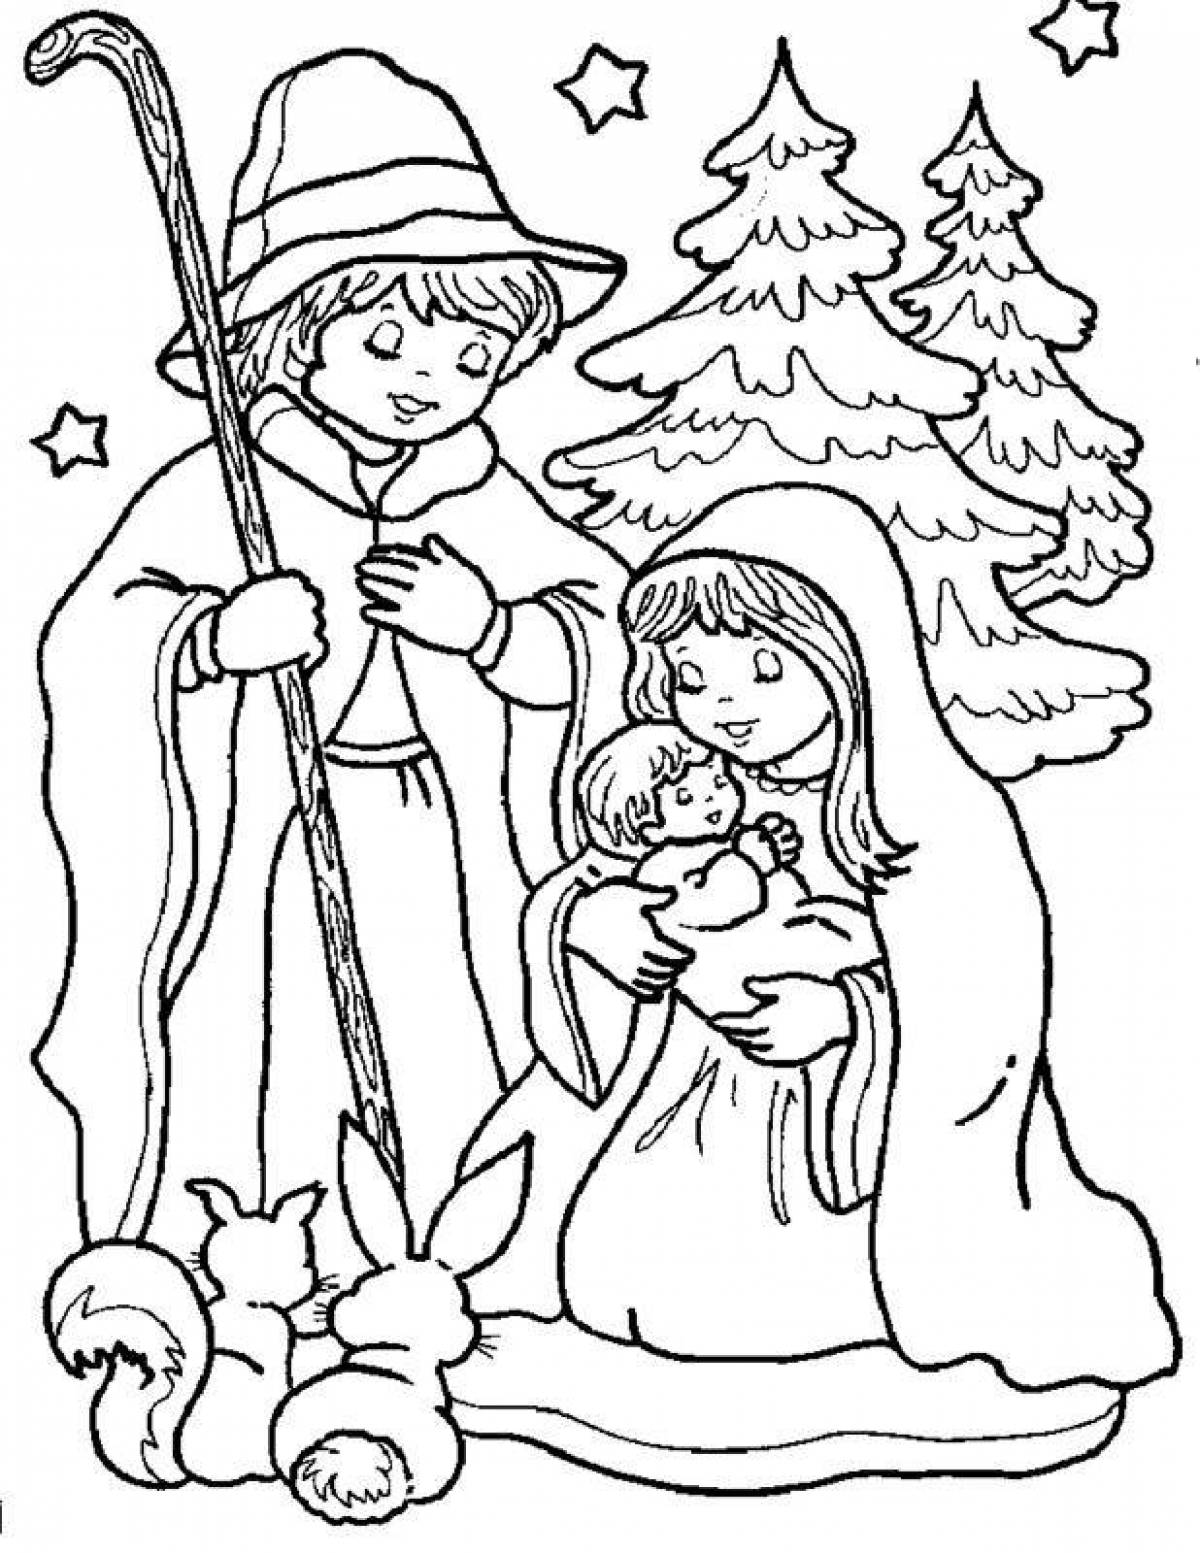 Blessed Christmas coloring book for 6-7 year olds